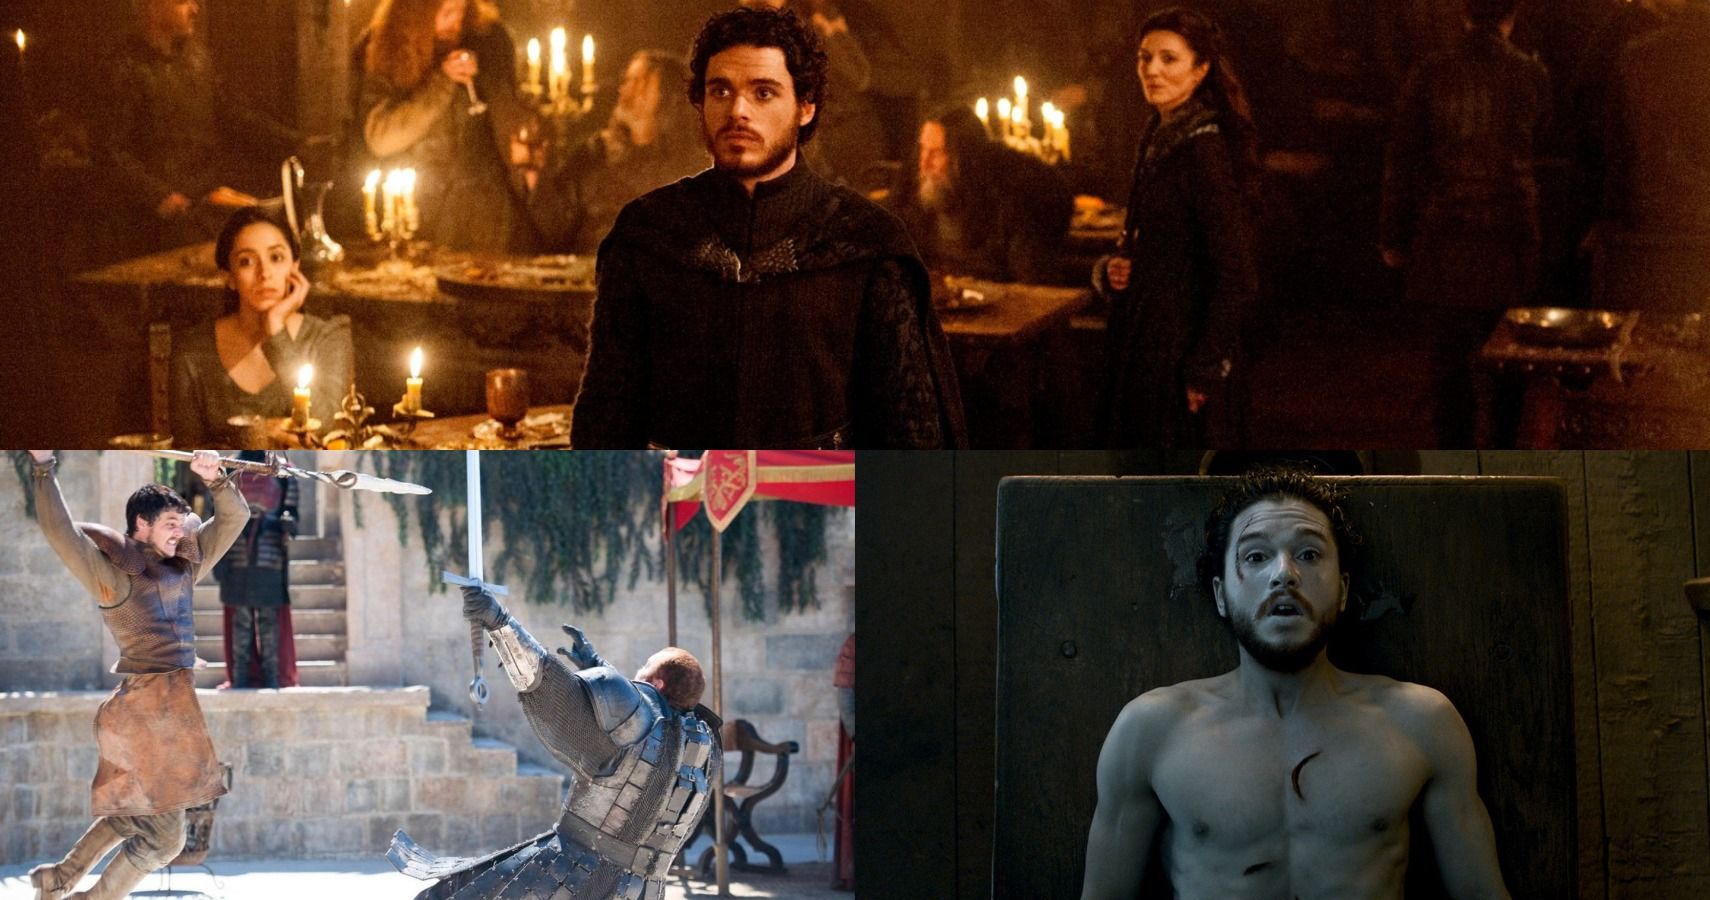 beskydning Slør Monopol Game of Thrones: Which Episode Was The Red Wedding? (& 9 Other Episodes  With Major Plot Twists)